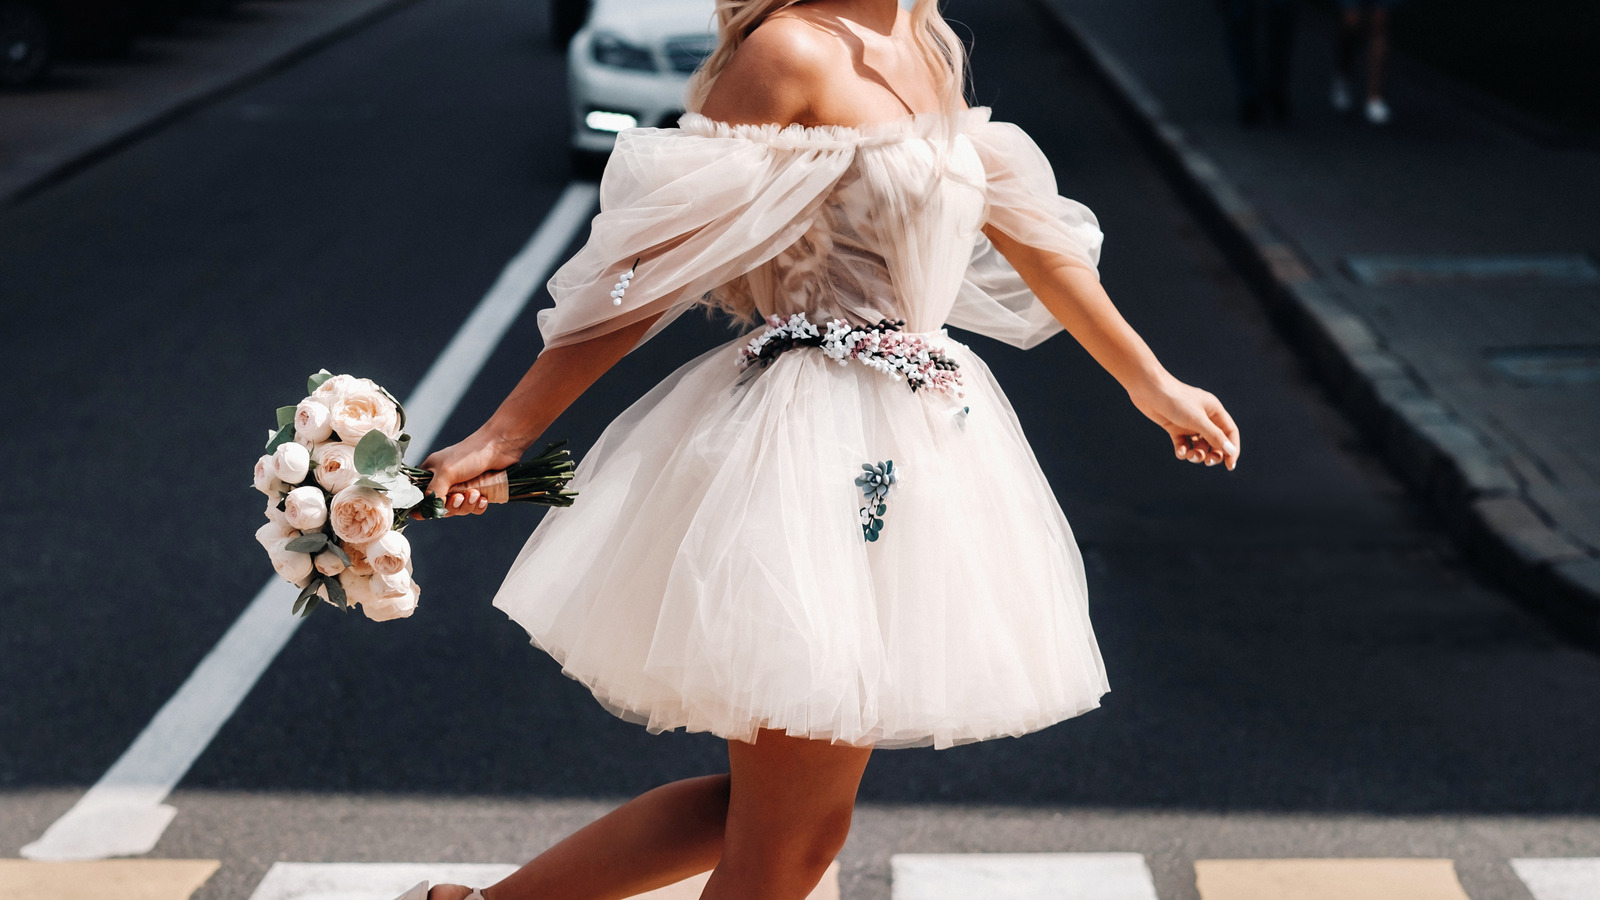 Bridal Fashion Is Trending For Everyday Looks - Here's How To Pull